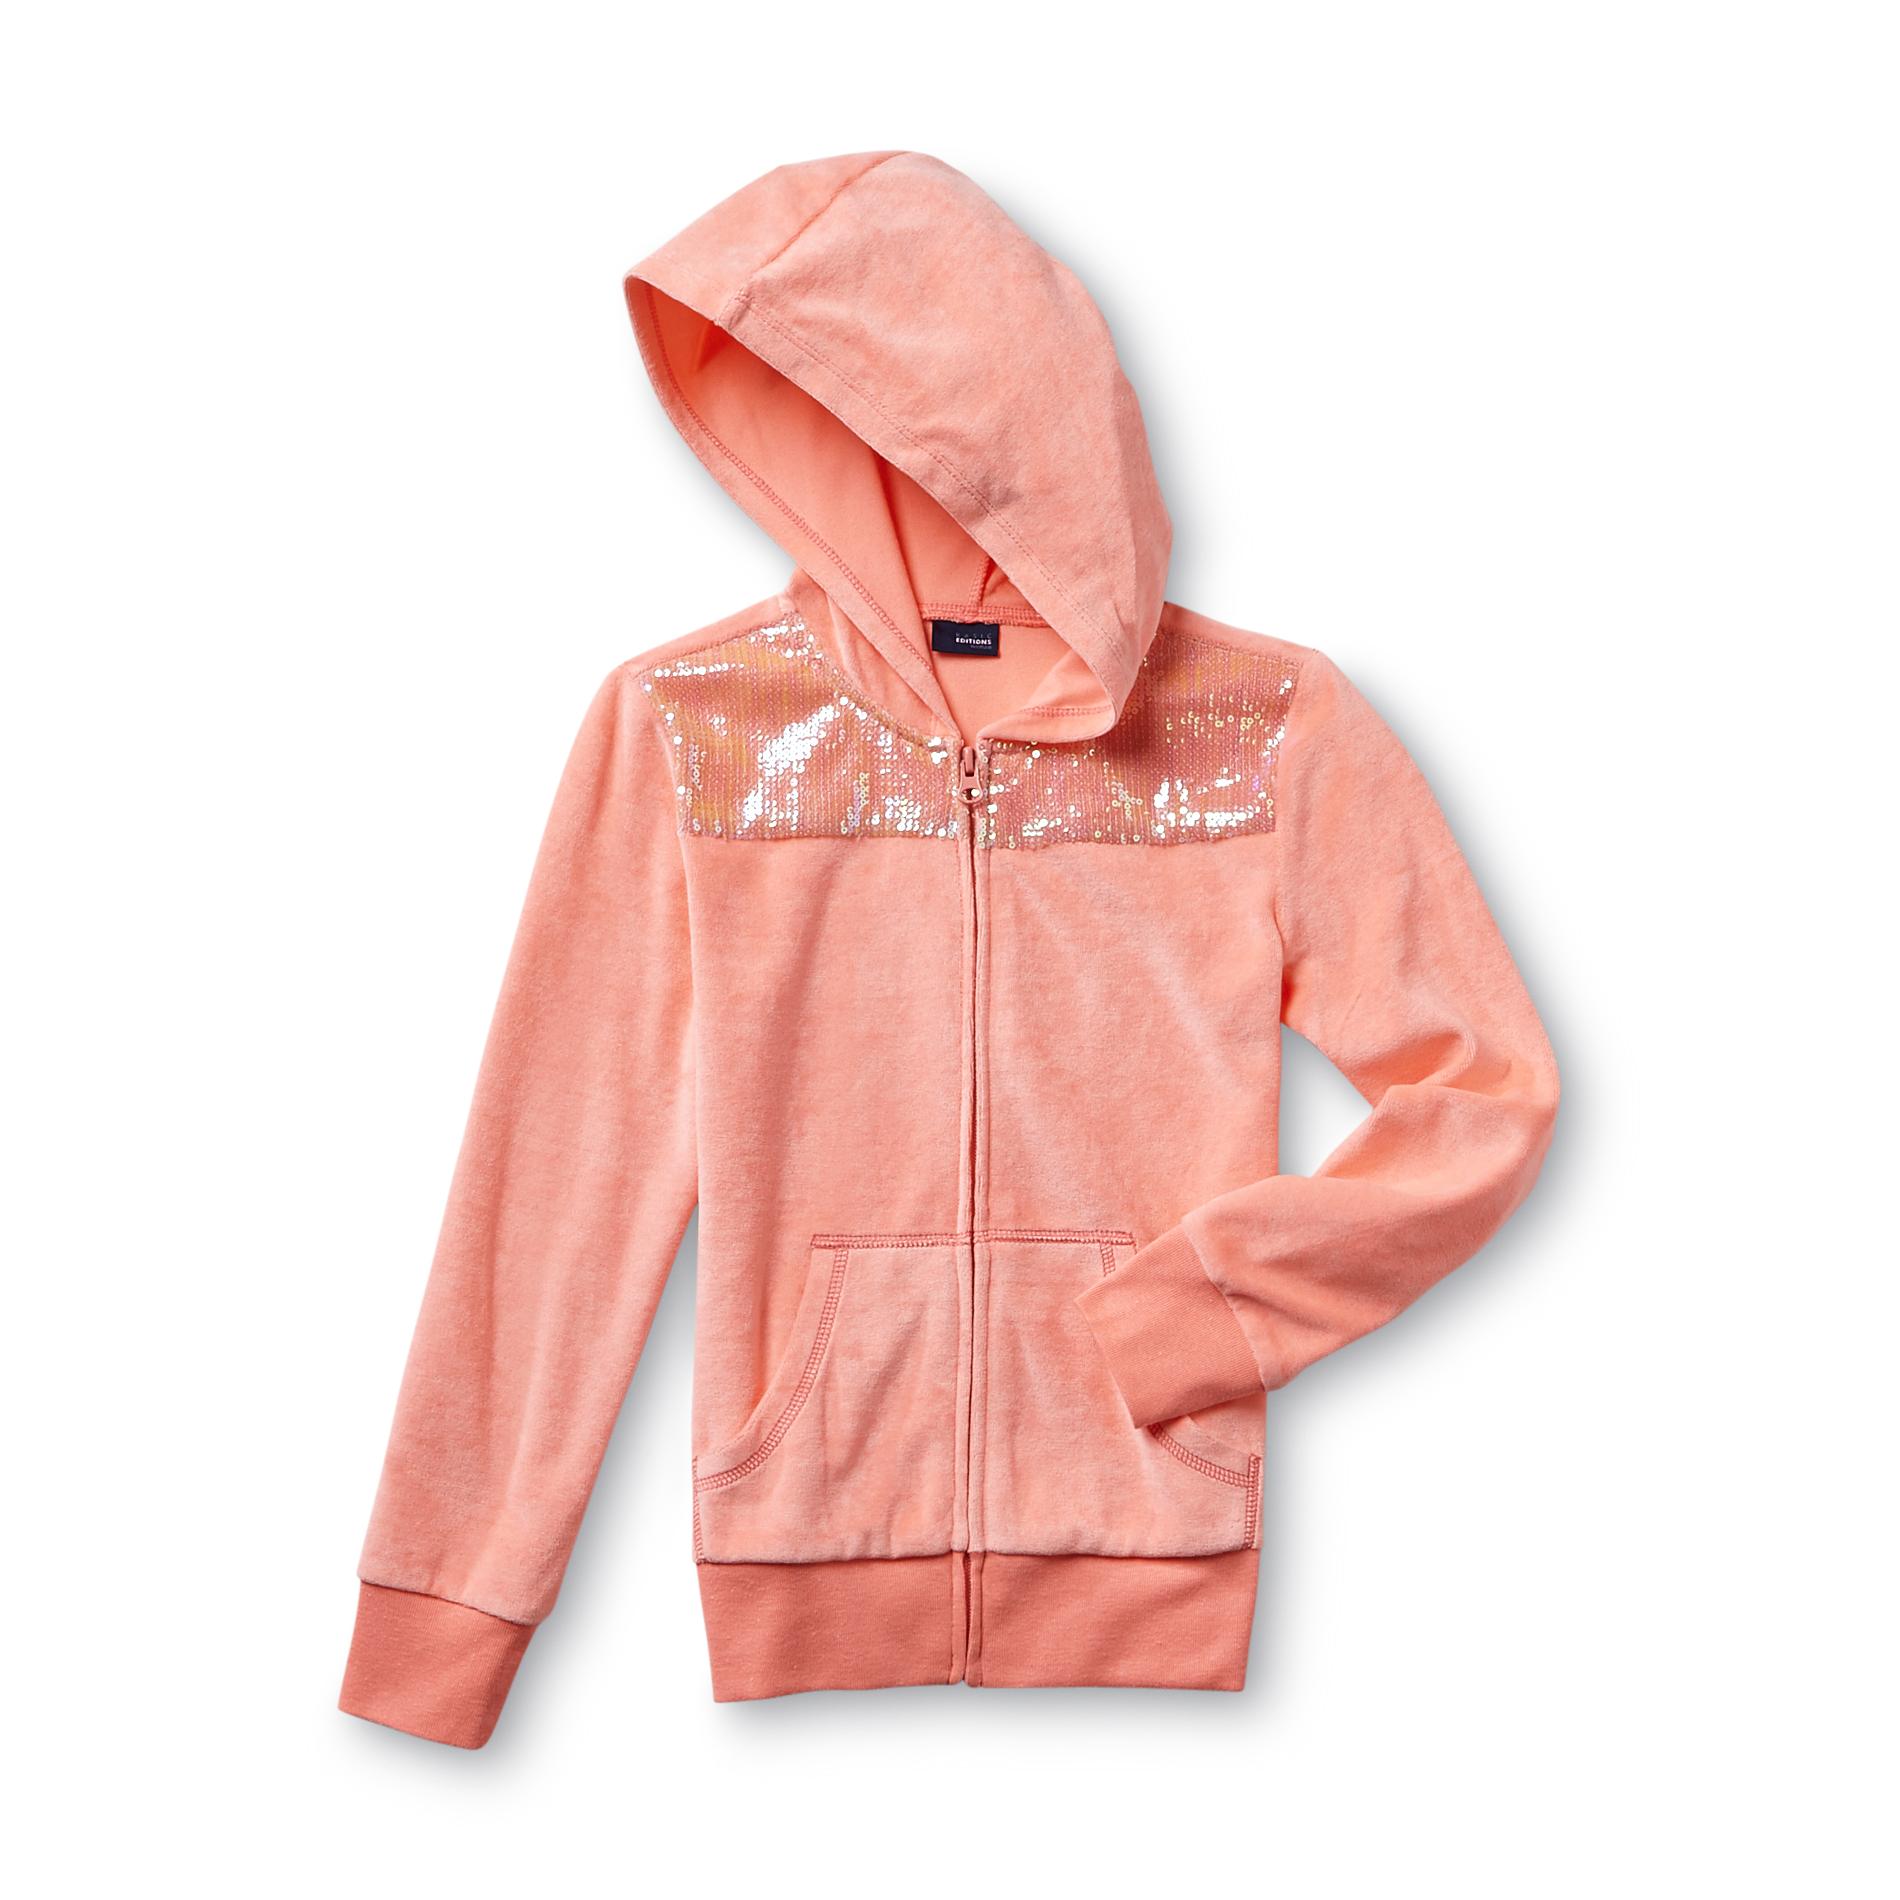 Basic Editions Girl's Neon Velour Hoodie Jacket - Sequins